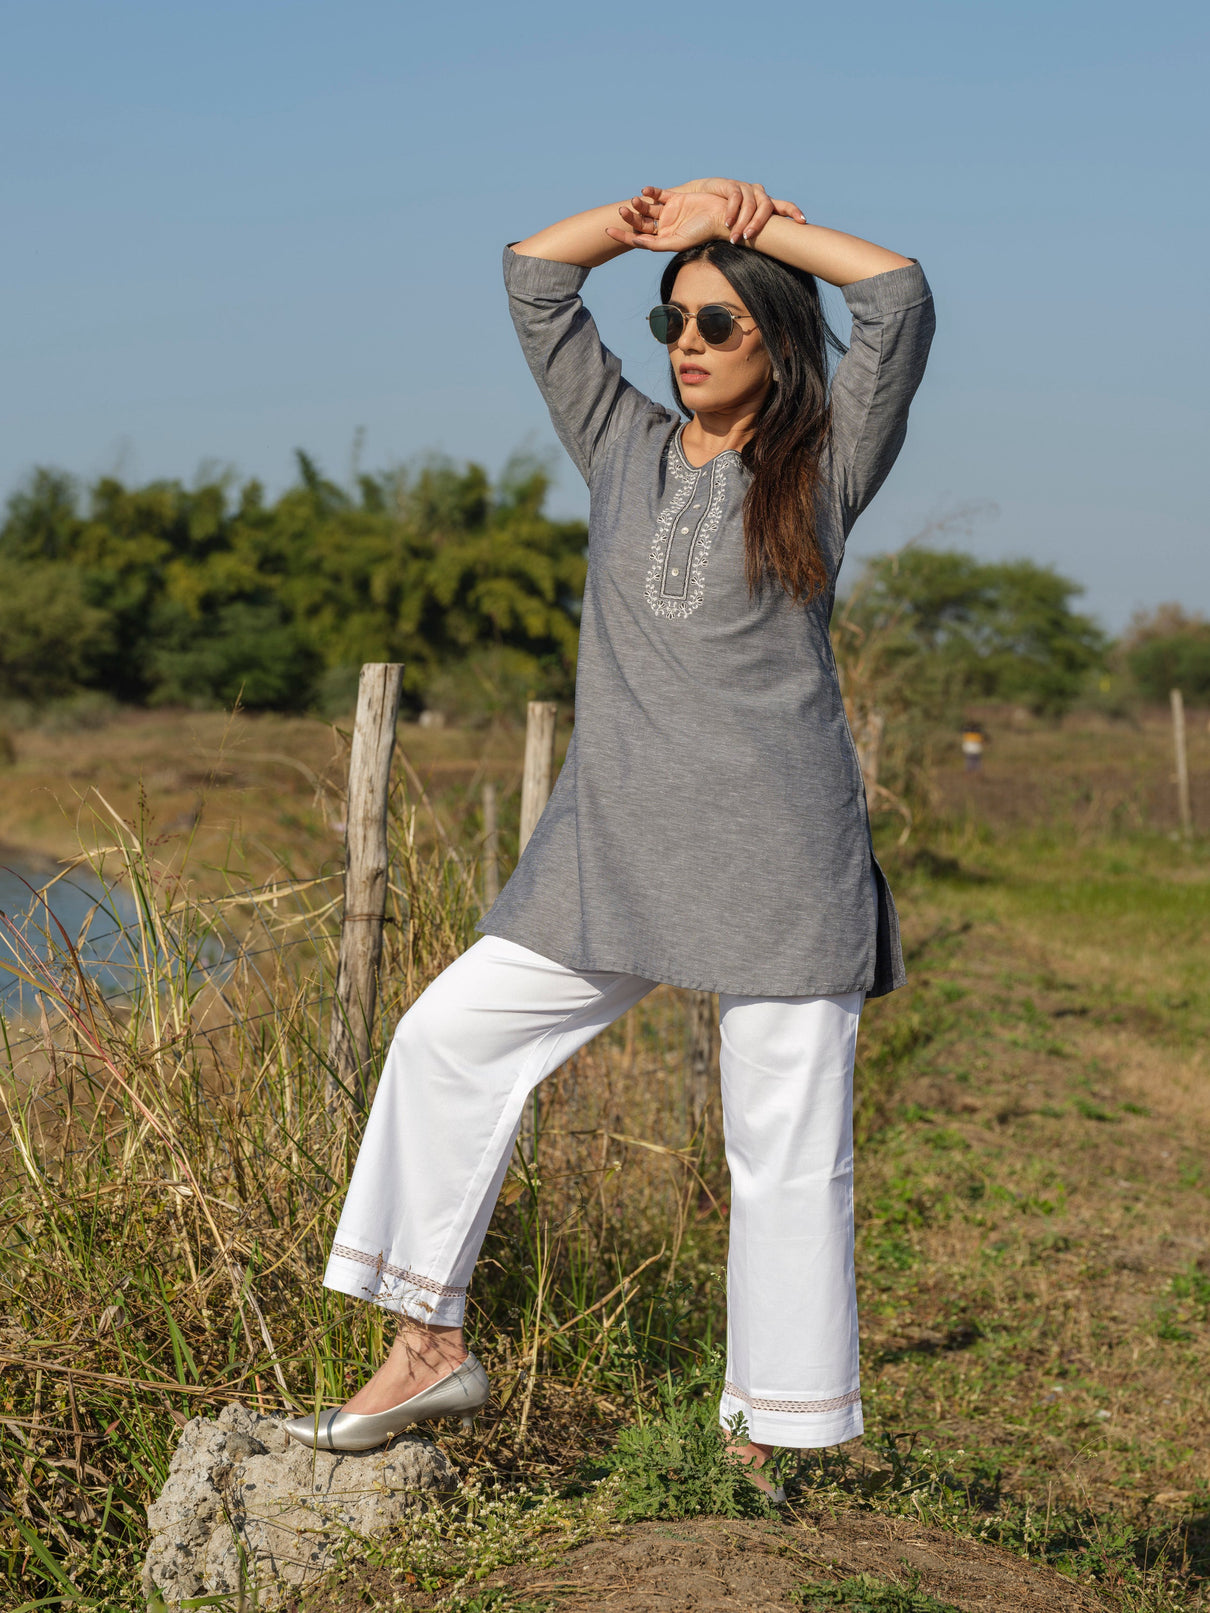 Dual Tone Textured Short Kurta with Embroidery